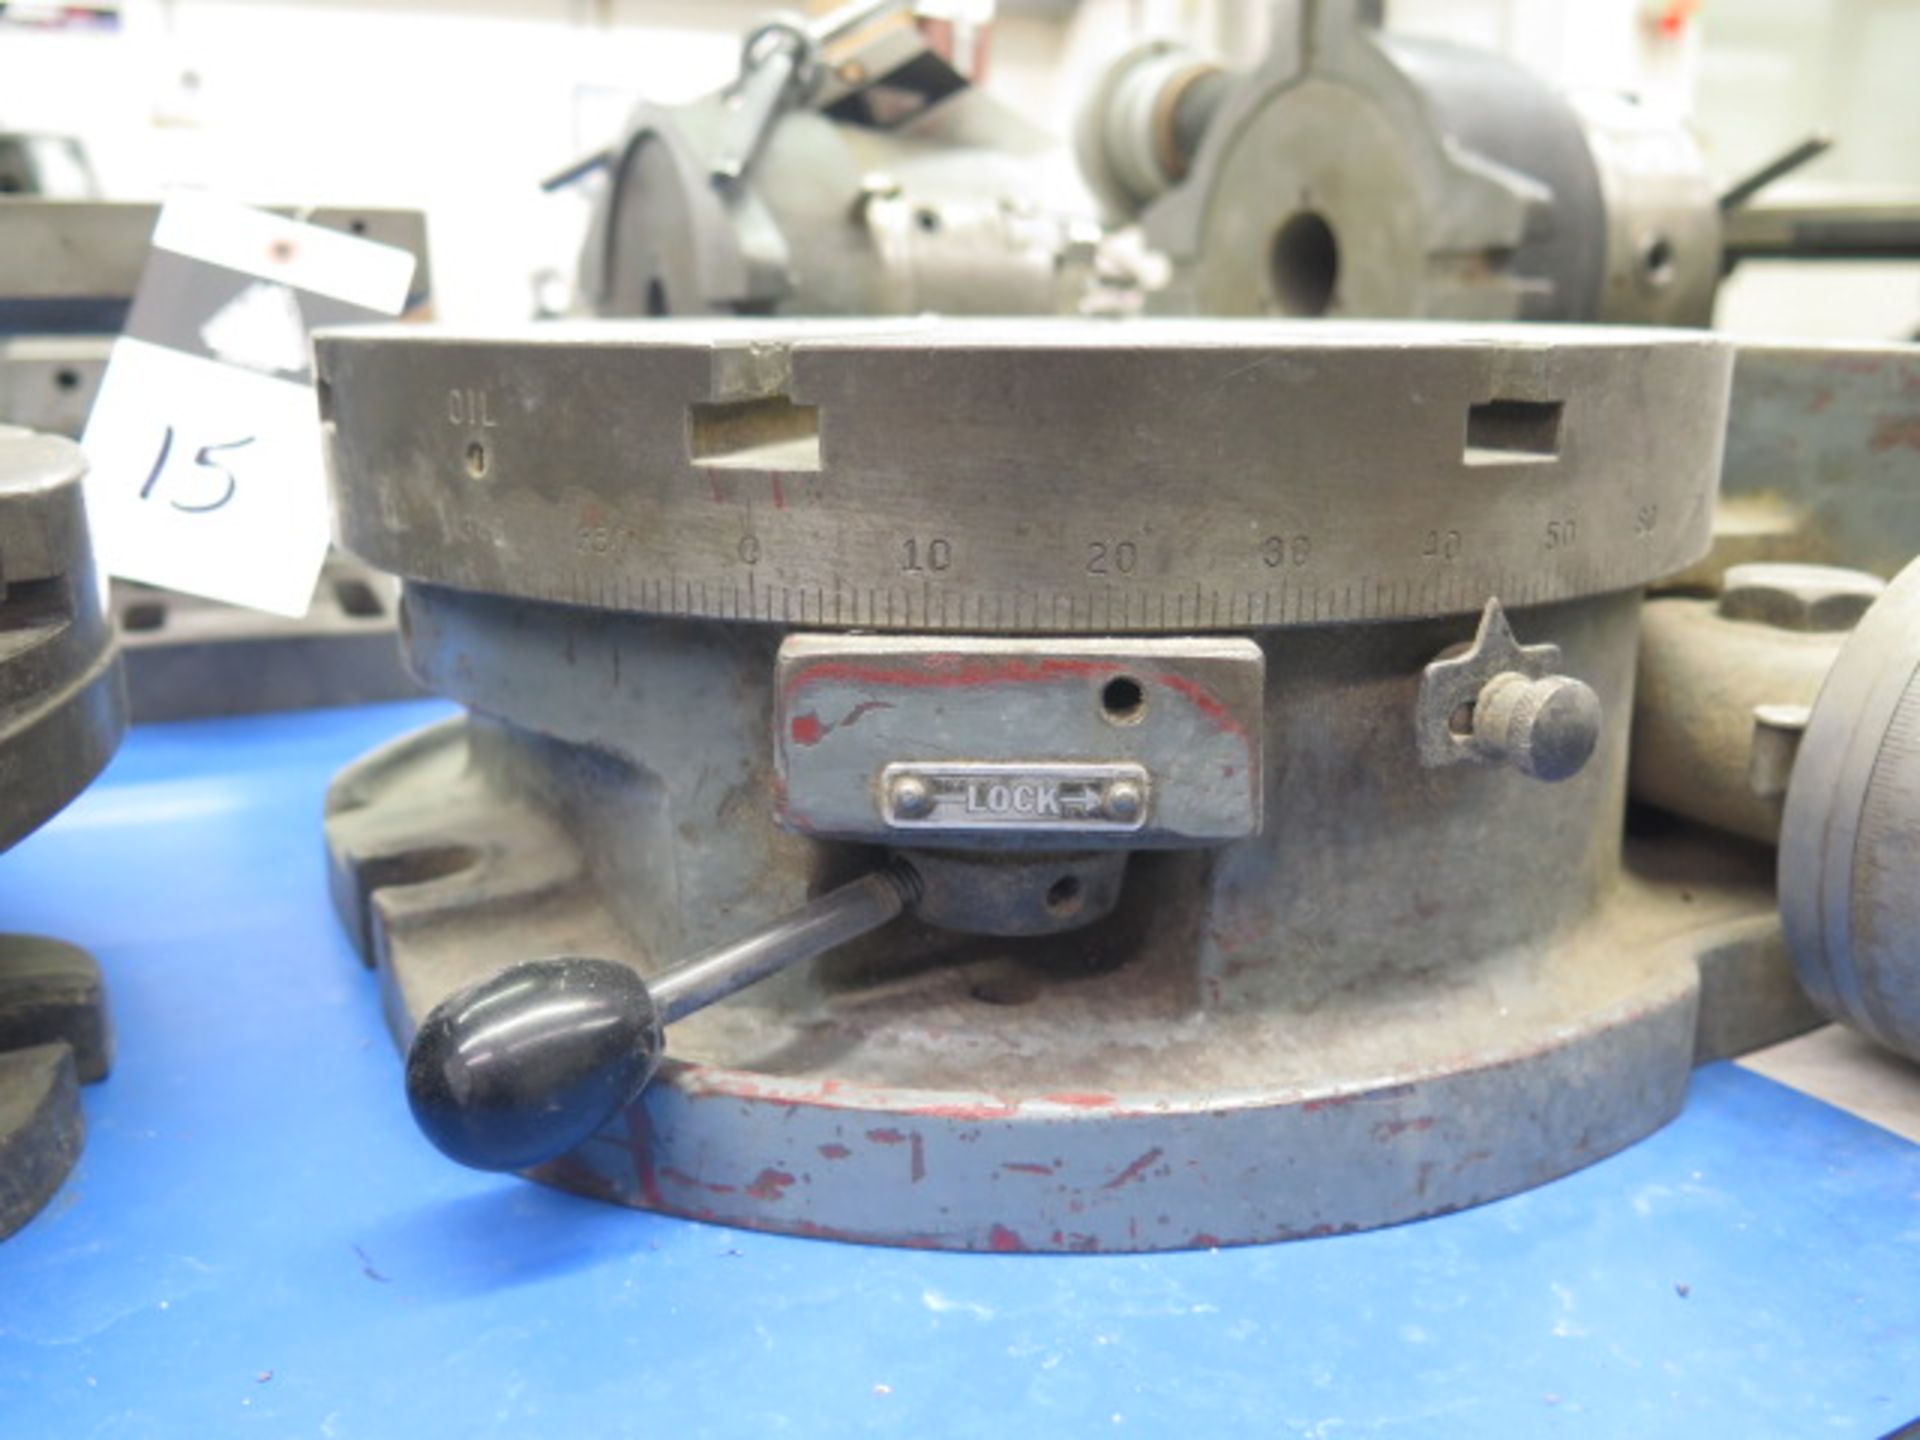 12" Rotary Table (SOLD AS-IS - NO WARRANTY) - Image 4 of 5